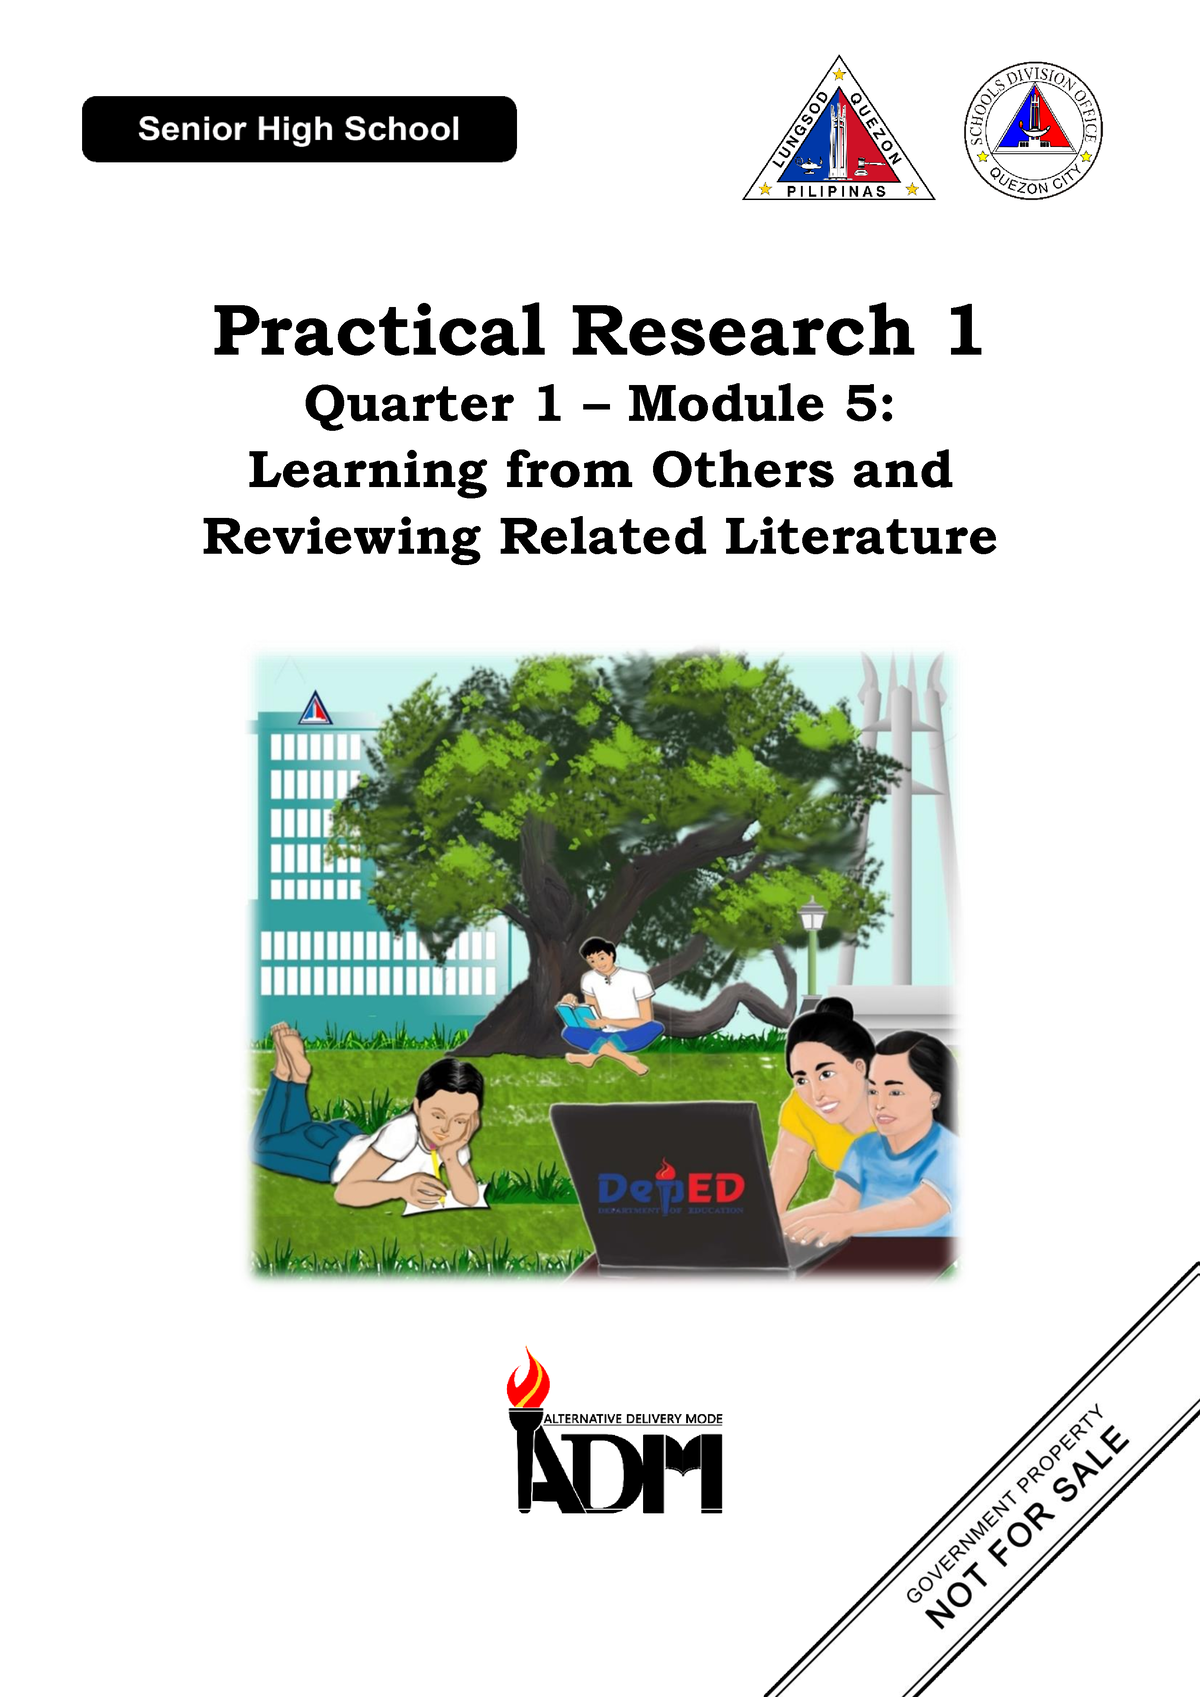 practical research module 5 review of related literature